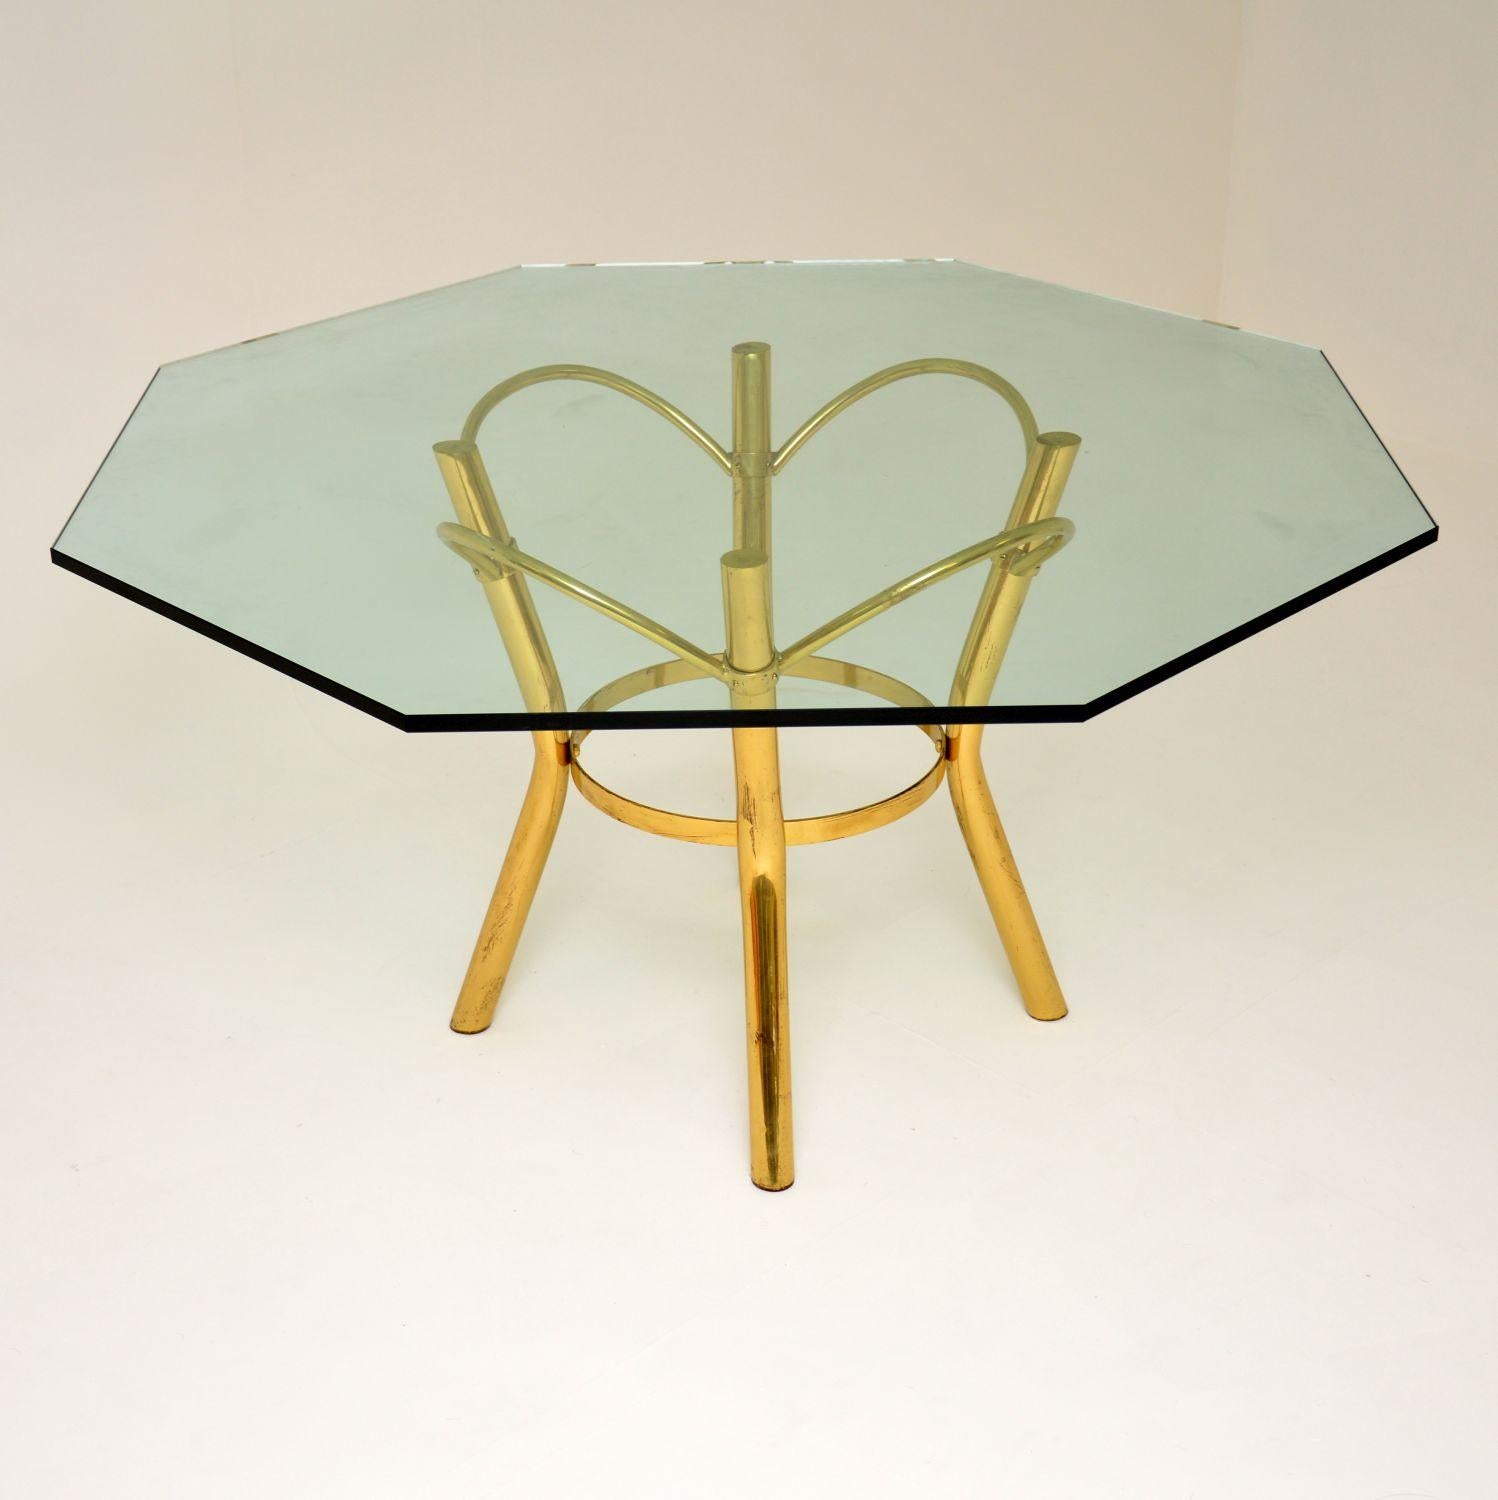 A stunning vintage dining table with a fantastic brass frame, and thick hexagonal glass top. This dates from the 1970s, it’s in excellent condition for its age. The top is very large and with eight sides, this table will comfortably seat eight